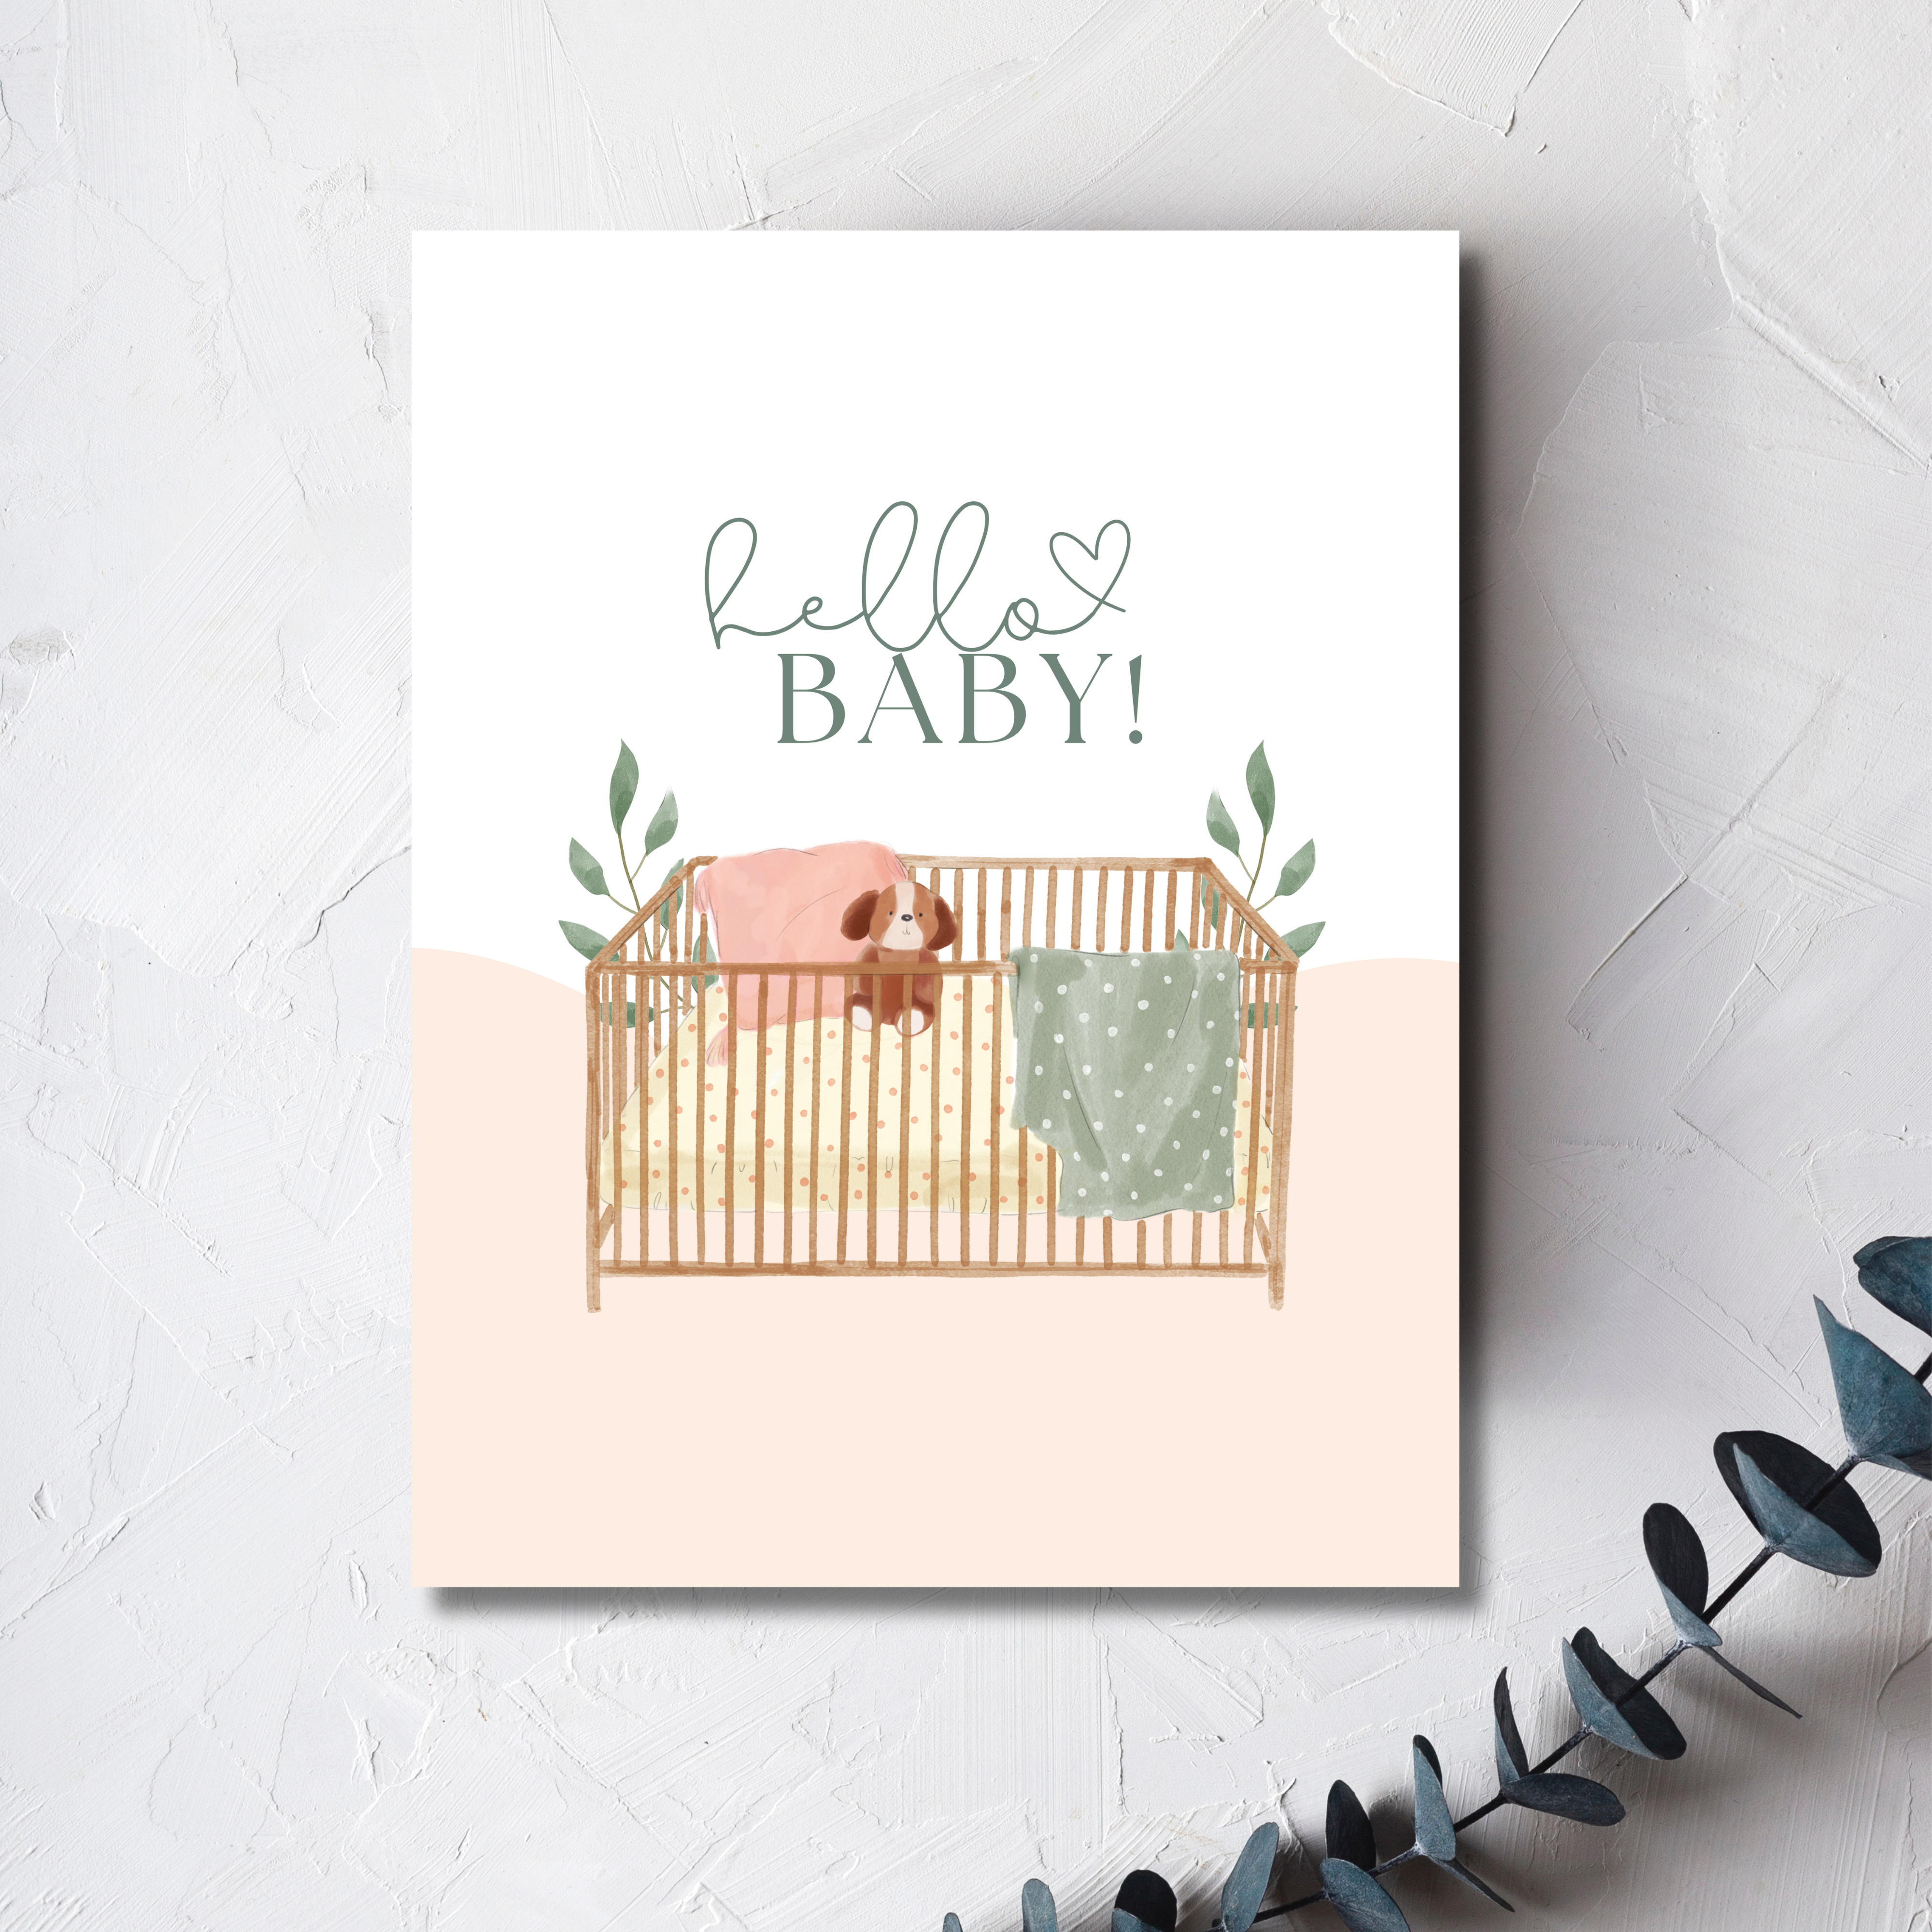 baby crib with fuzzy blankets and stuffed toy animal adorned with leaves, hello baby text with heart written above